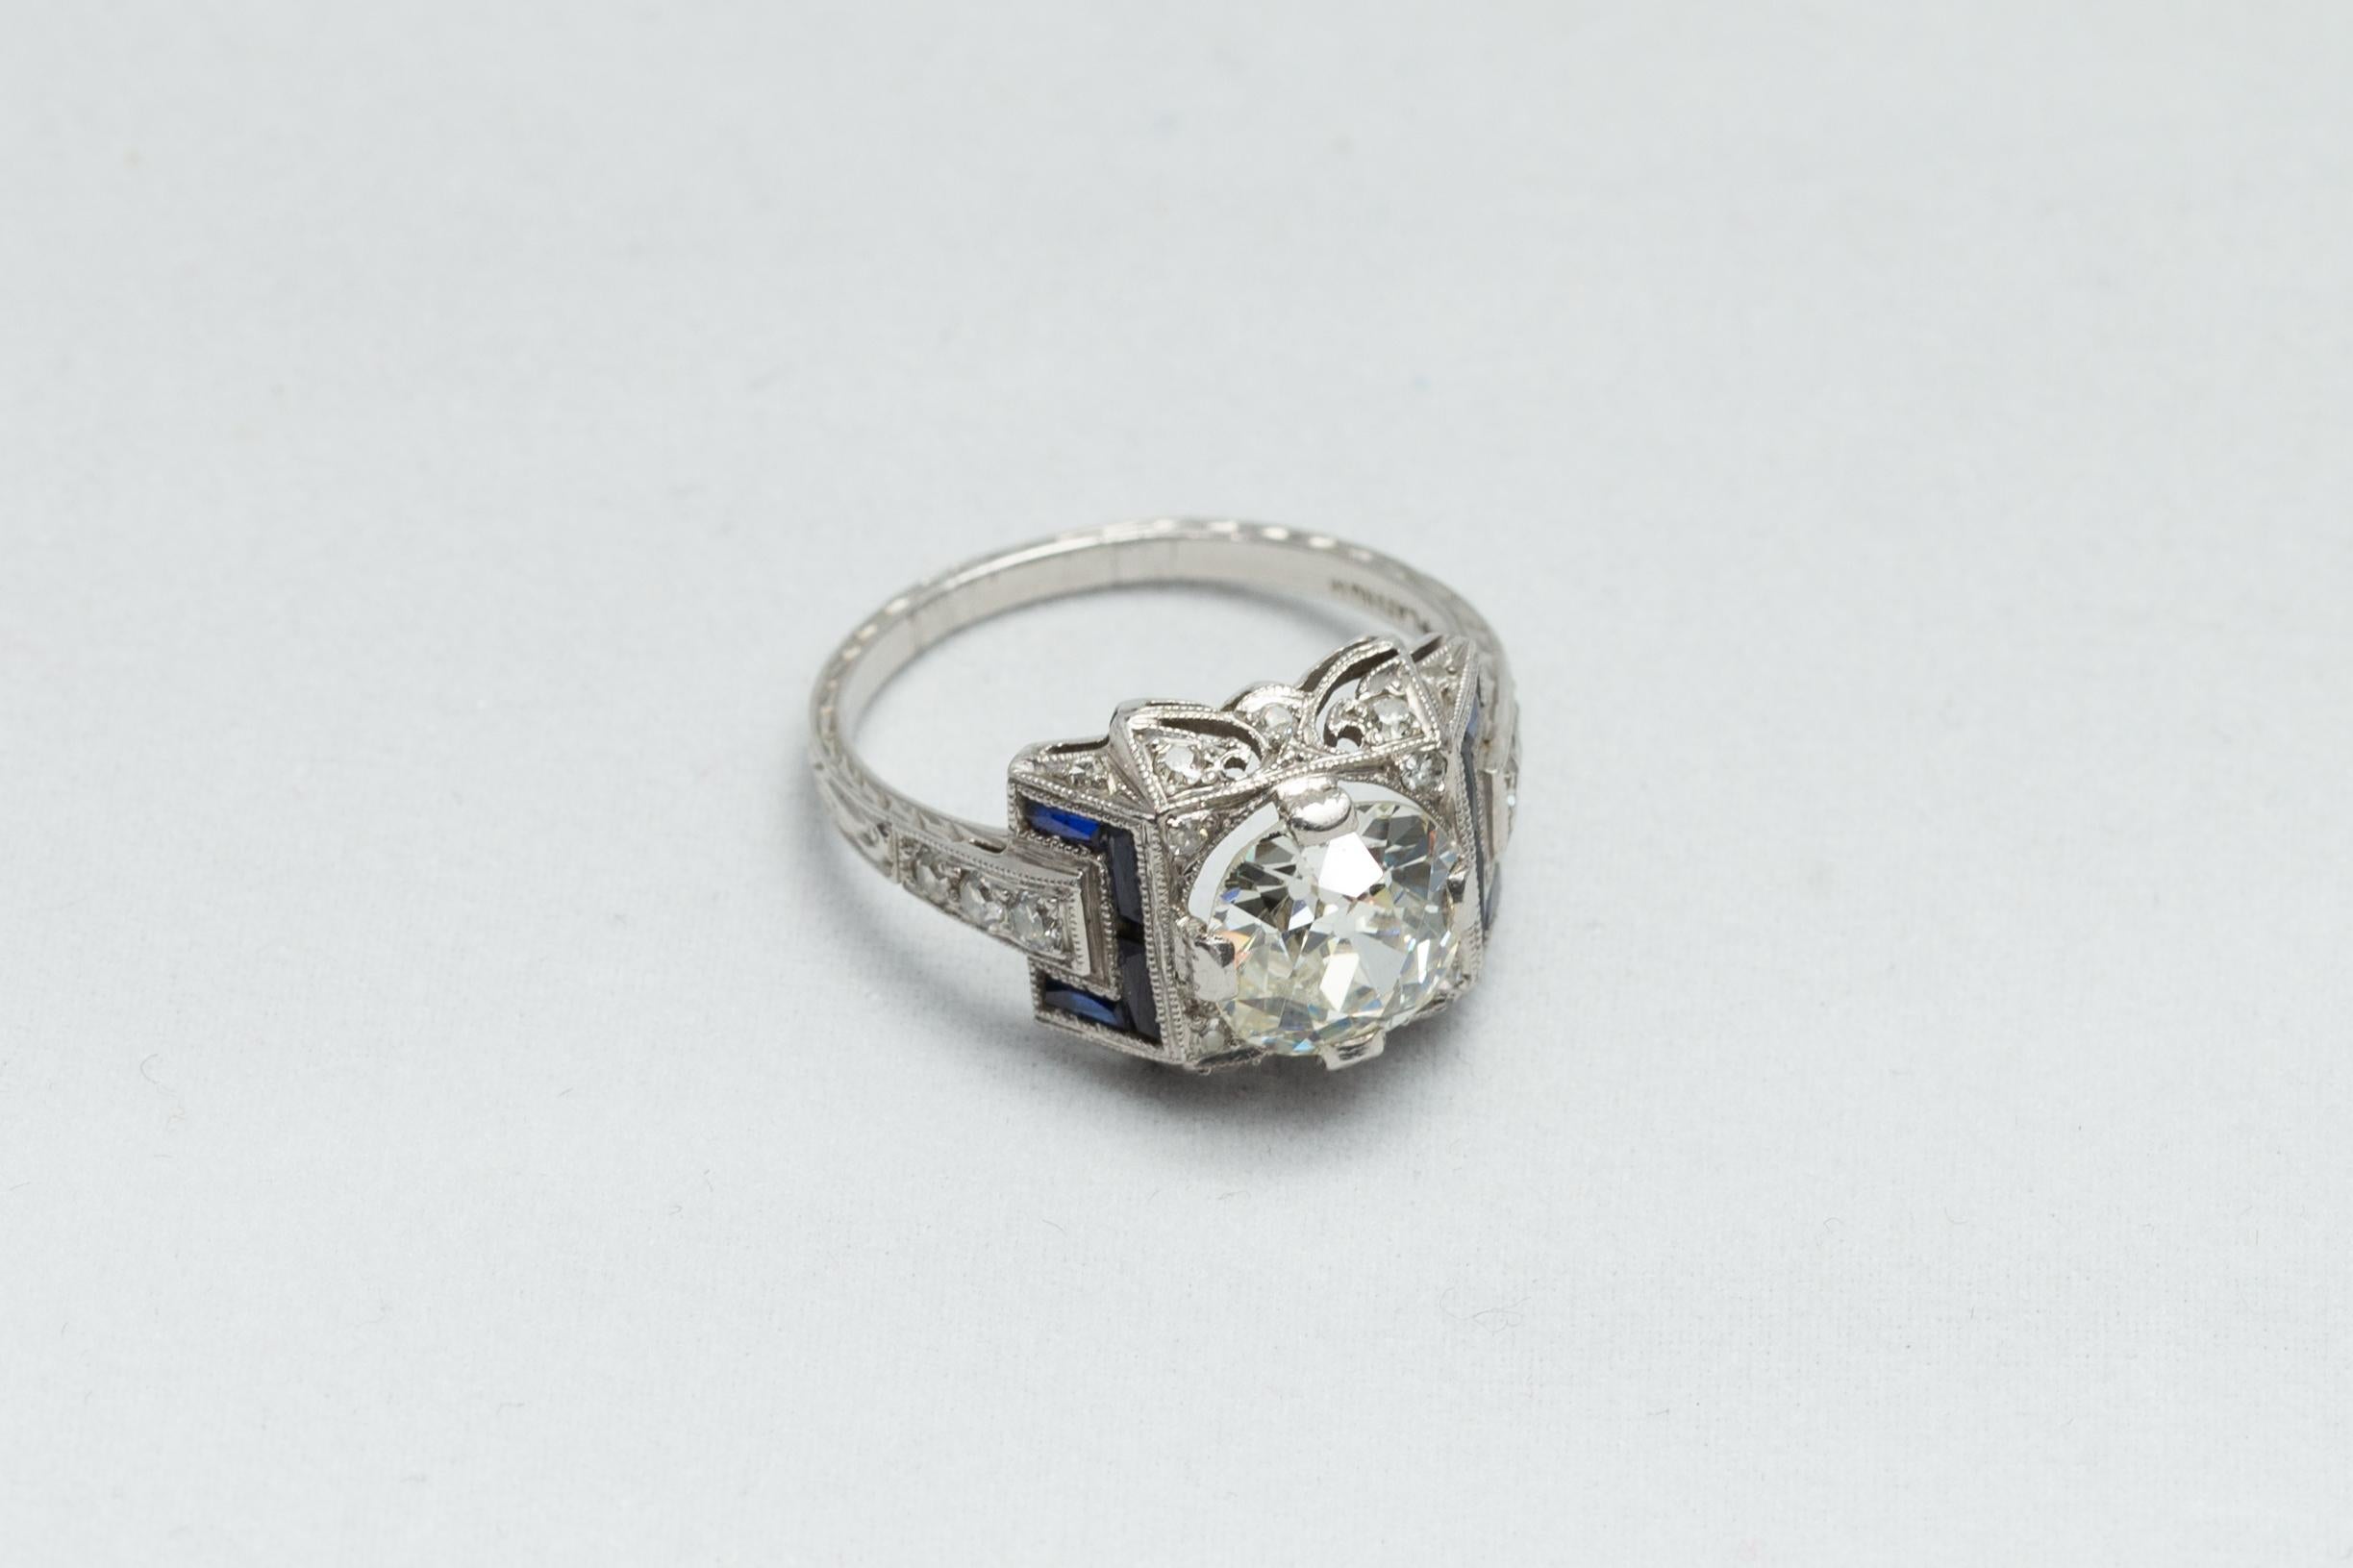 An Italian Art Deco solitaire Diamond ring, set in platinum, flanked with French cut Blue Sapphire, with accent diamonds, circa 1910-1930. Set in an Art Deco platinum mount, this original Art Deco is exquisite and features a central Old European cut